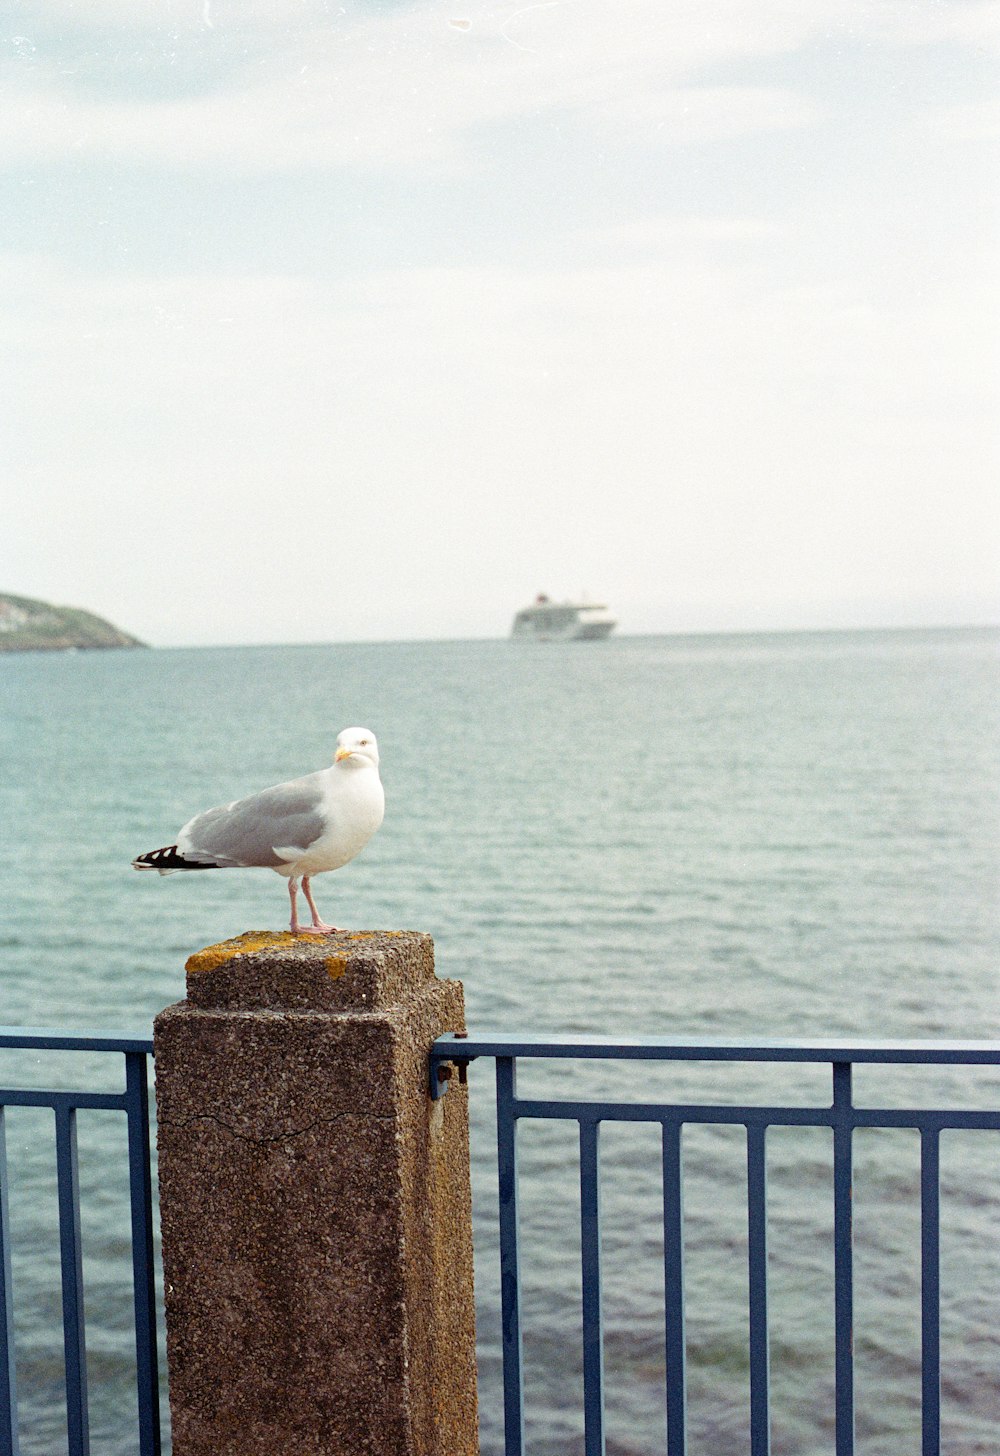 a seagull sitting on a post next to the ocean